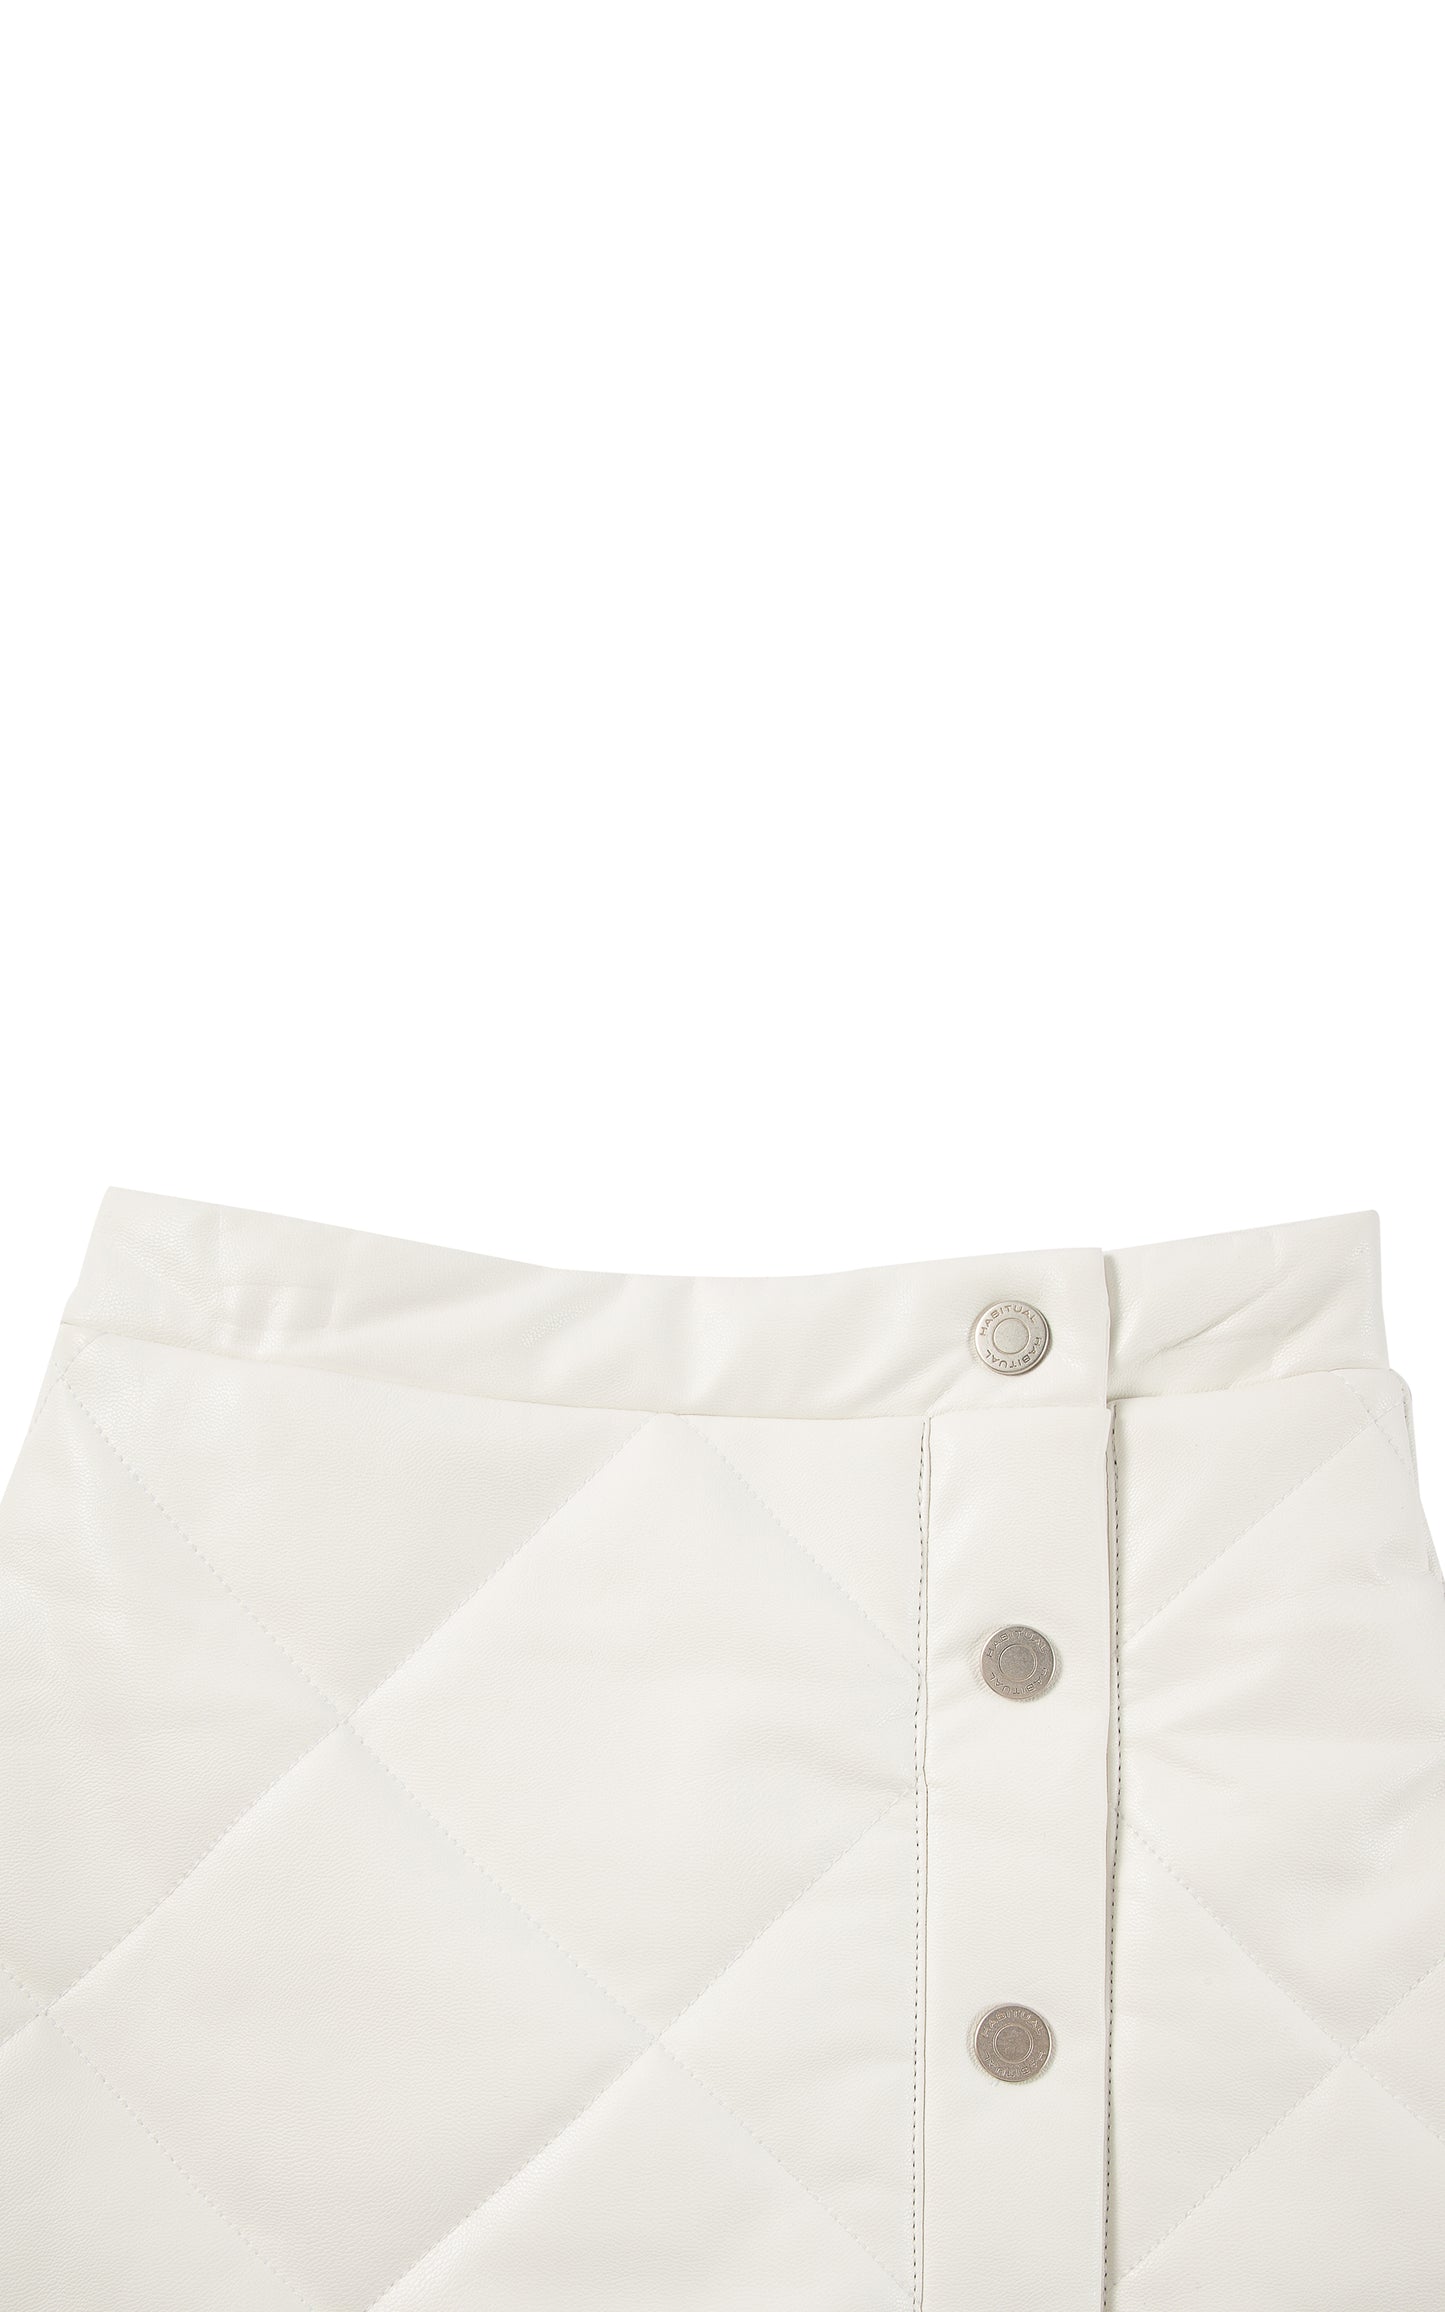 Detail view of an off-white quilted faux leather skirt with snaps